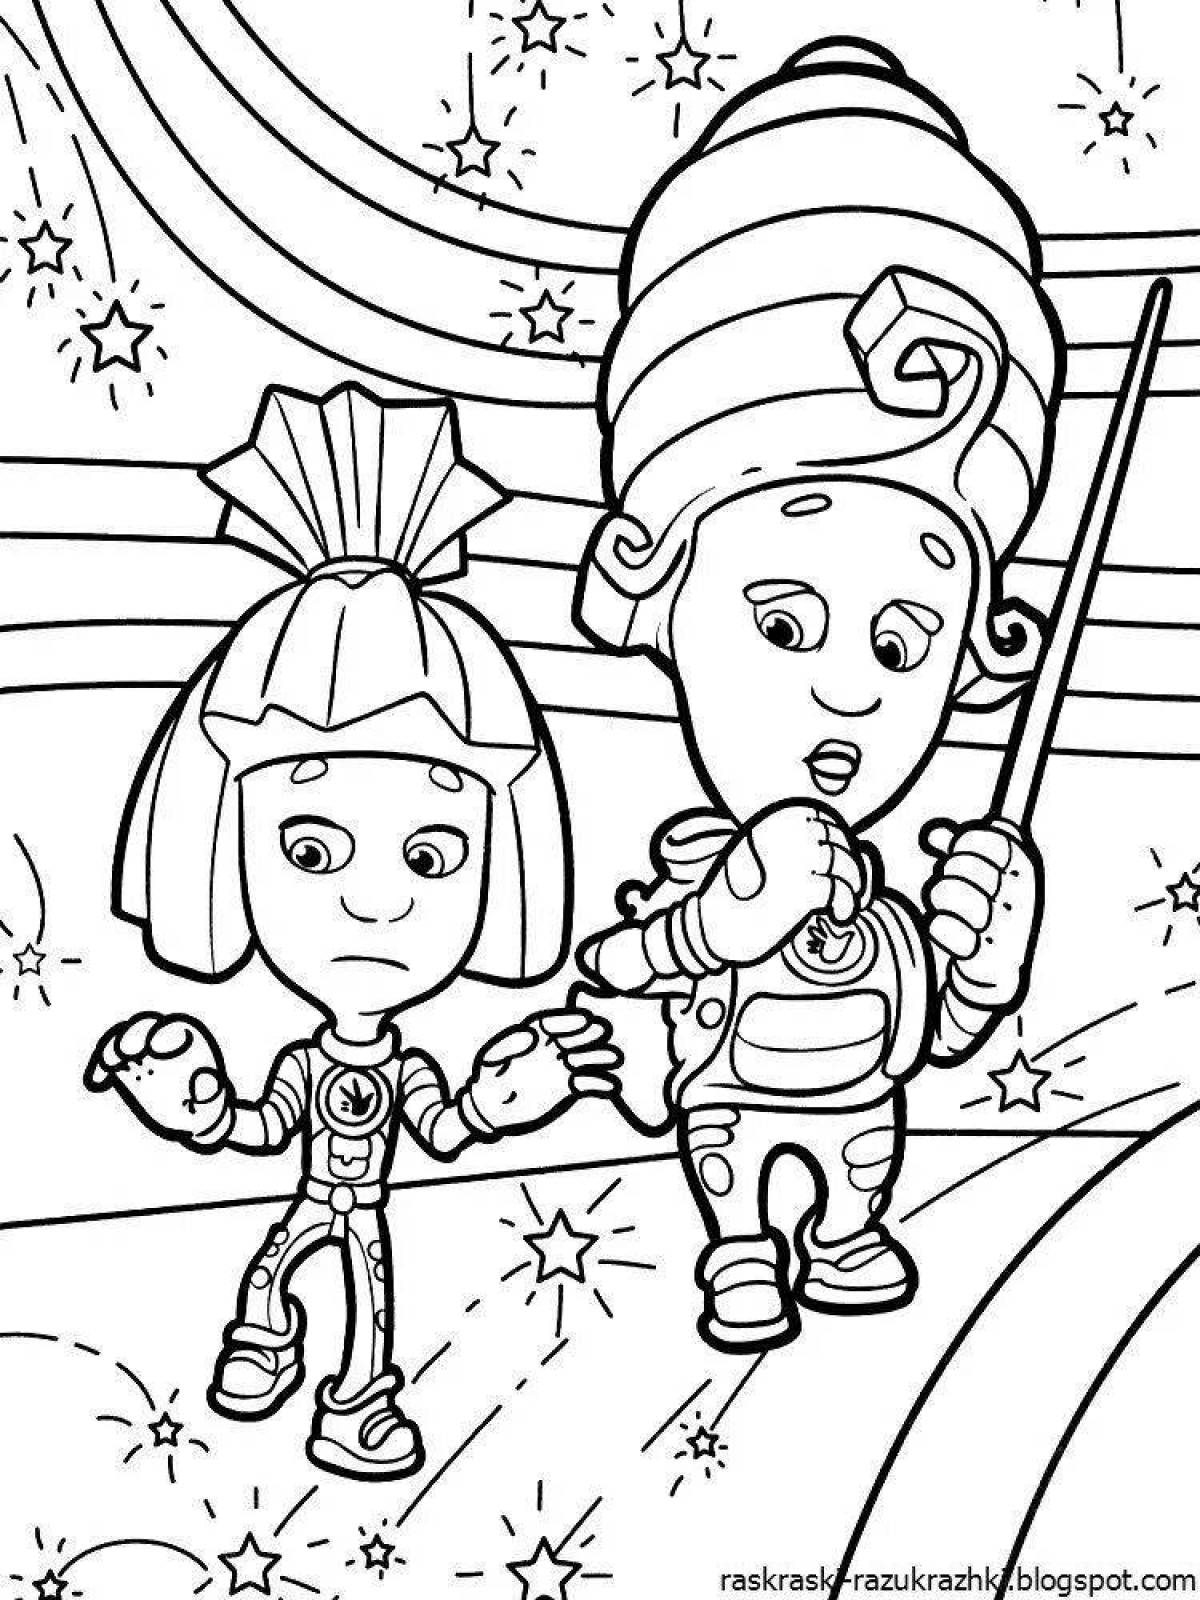 Adorable Fixies Coloring Pages for Girls